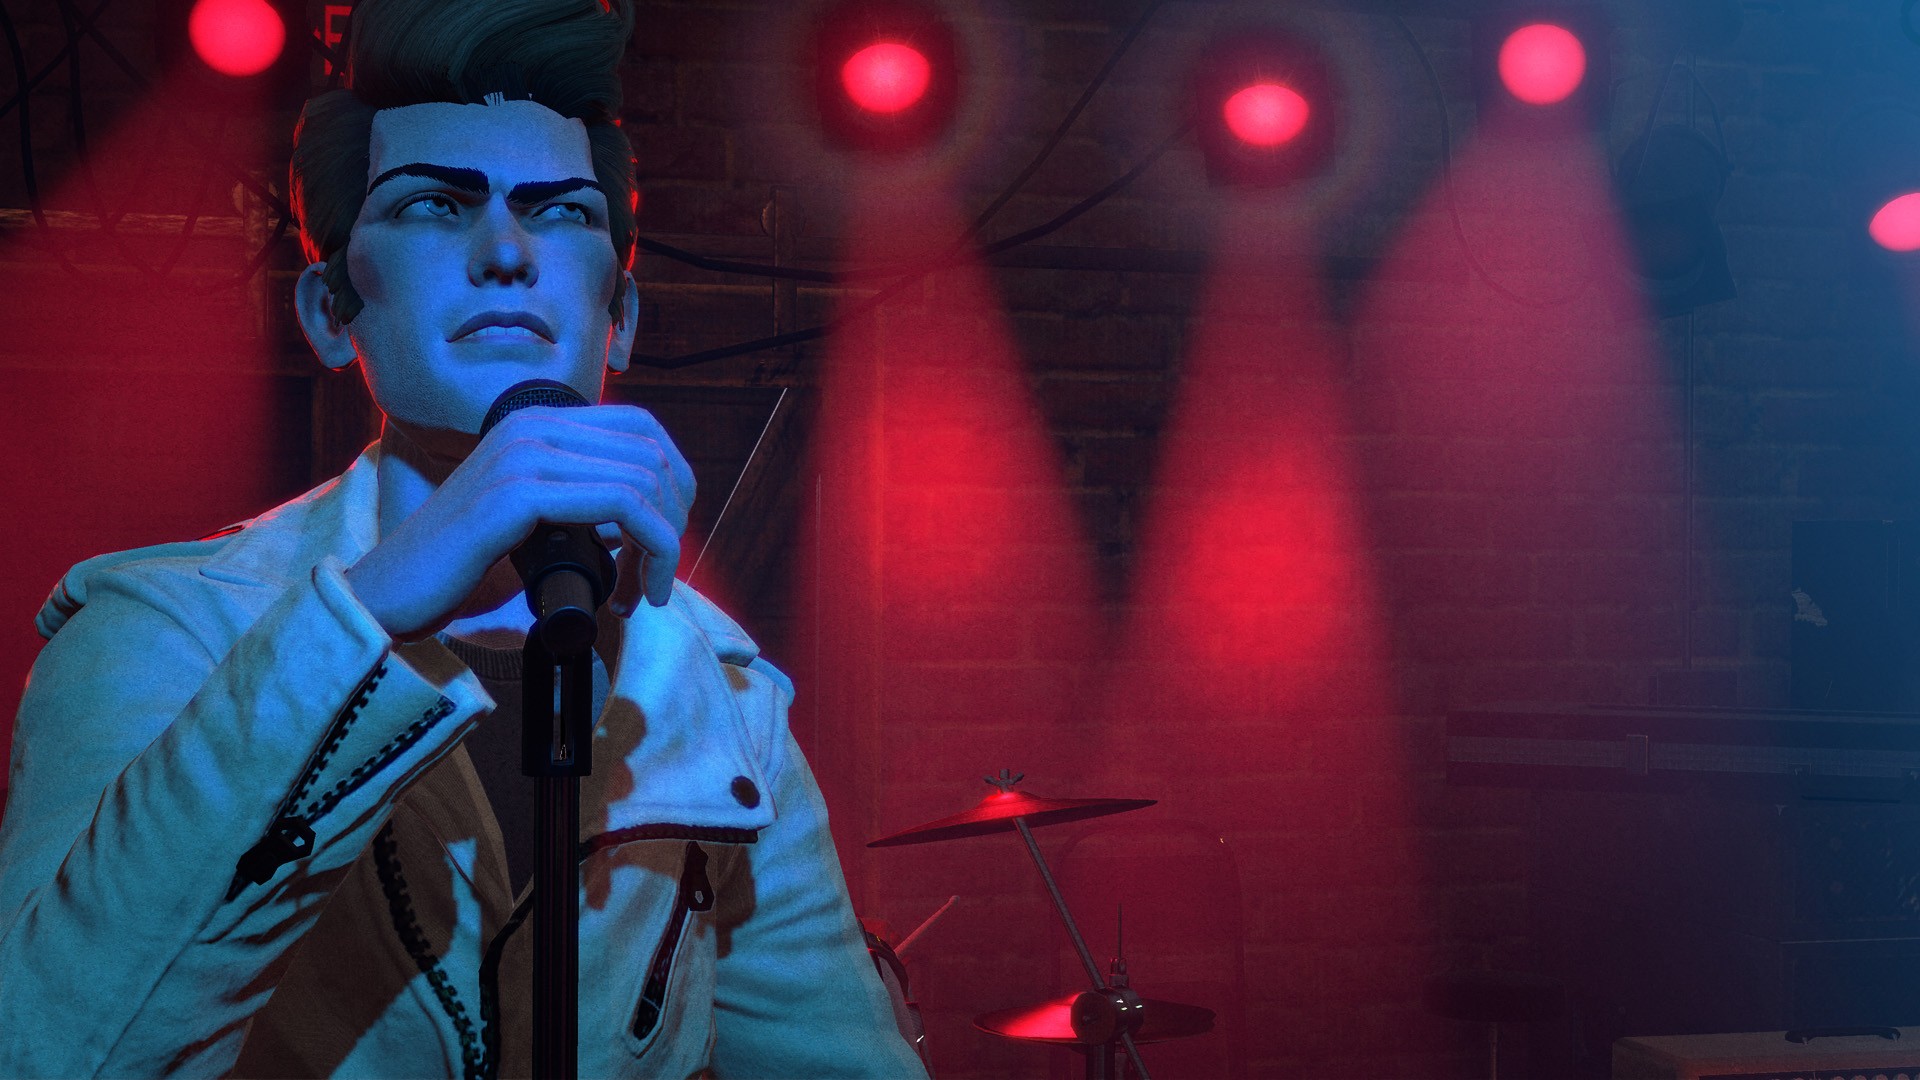 A singer humming on stage at Rock Band 4